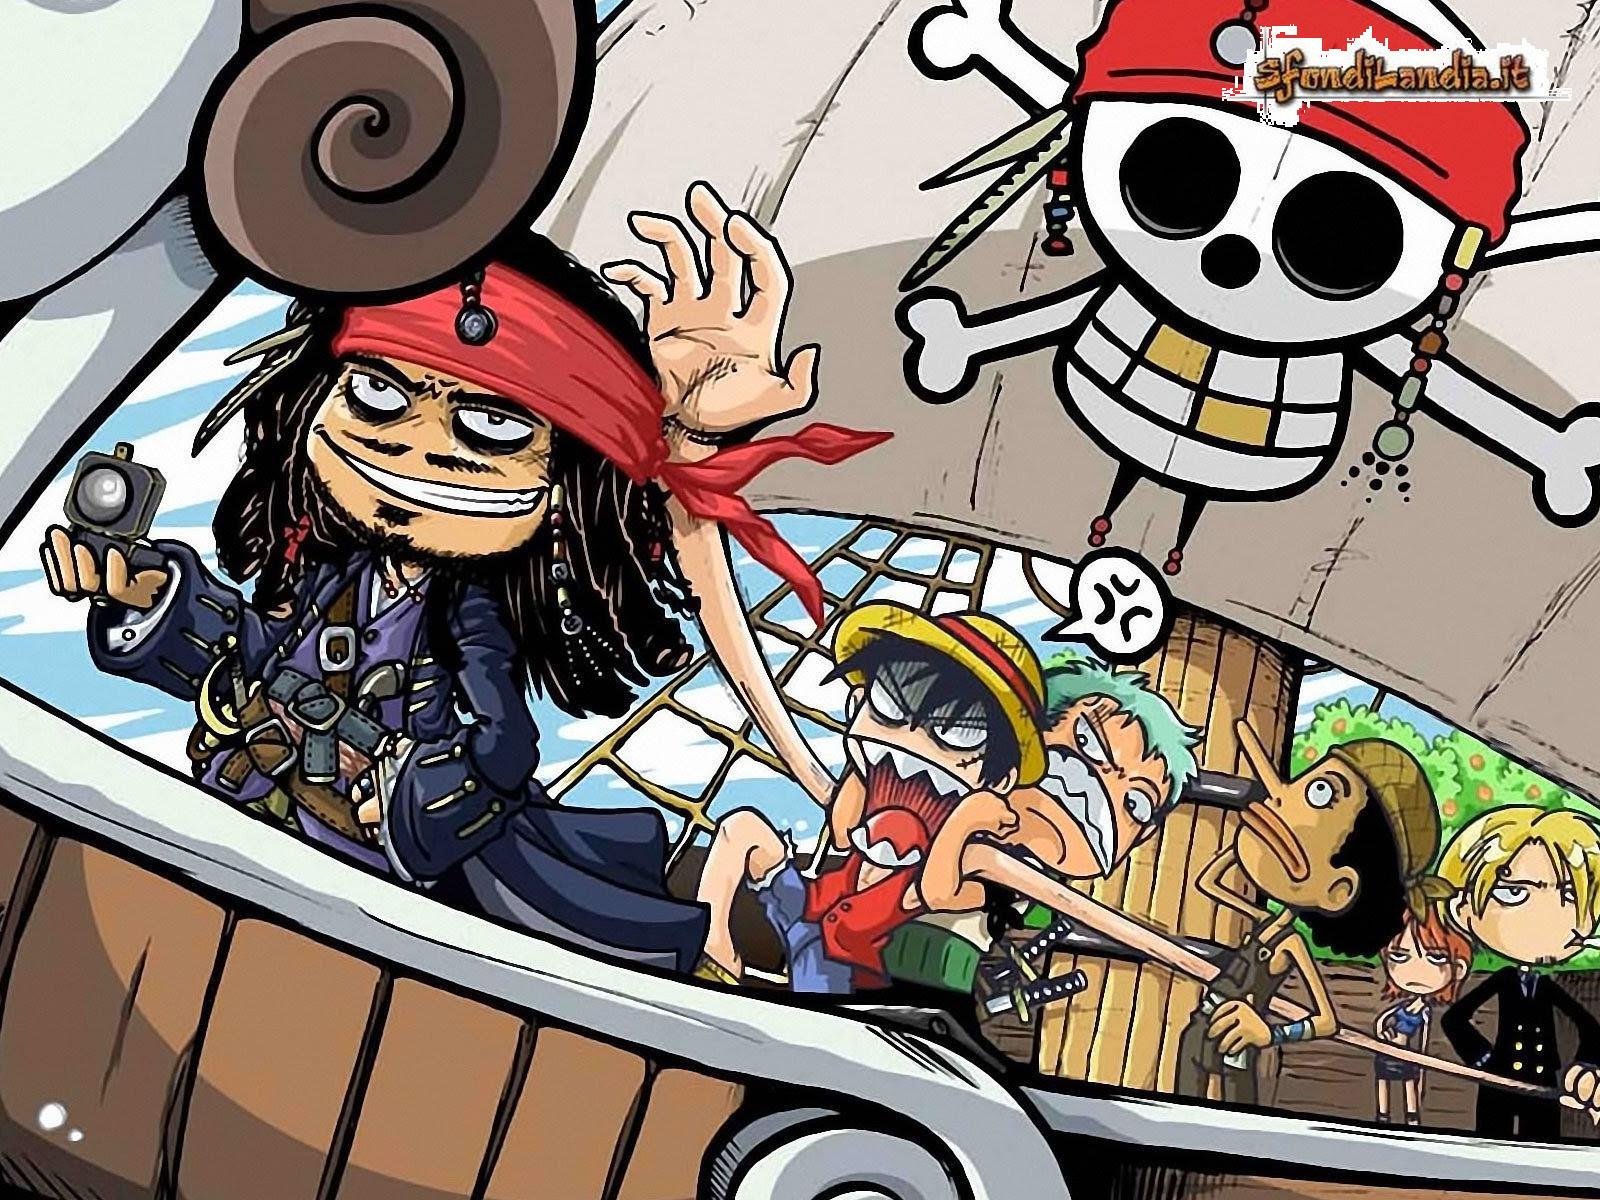 1600 x 1200 · jpeg - One Piece Wallpaper Ship / How to become a Pirate in One Piece! | Anime ...